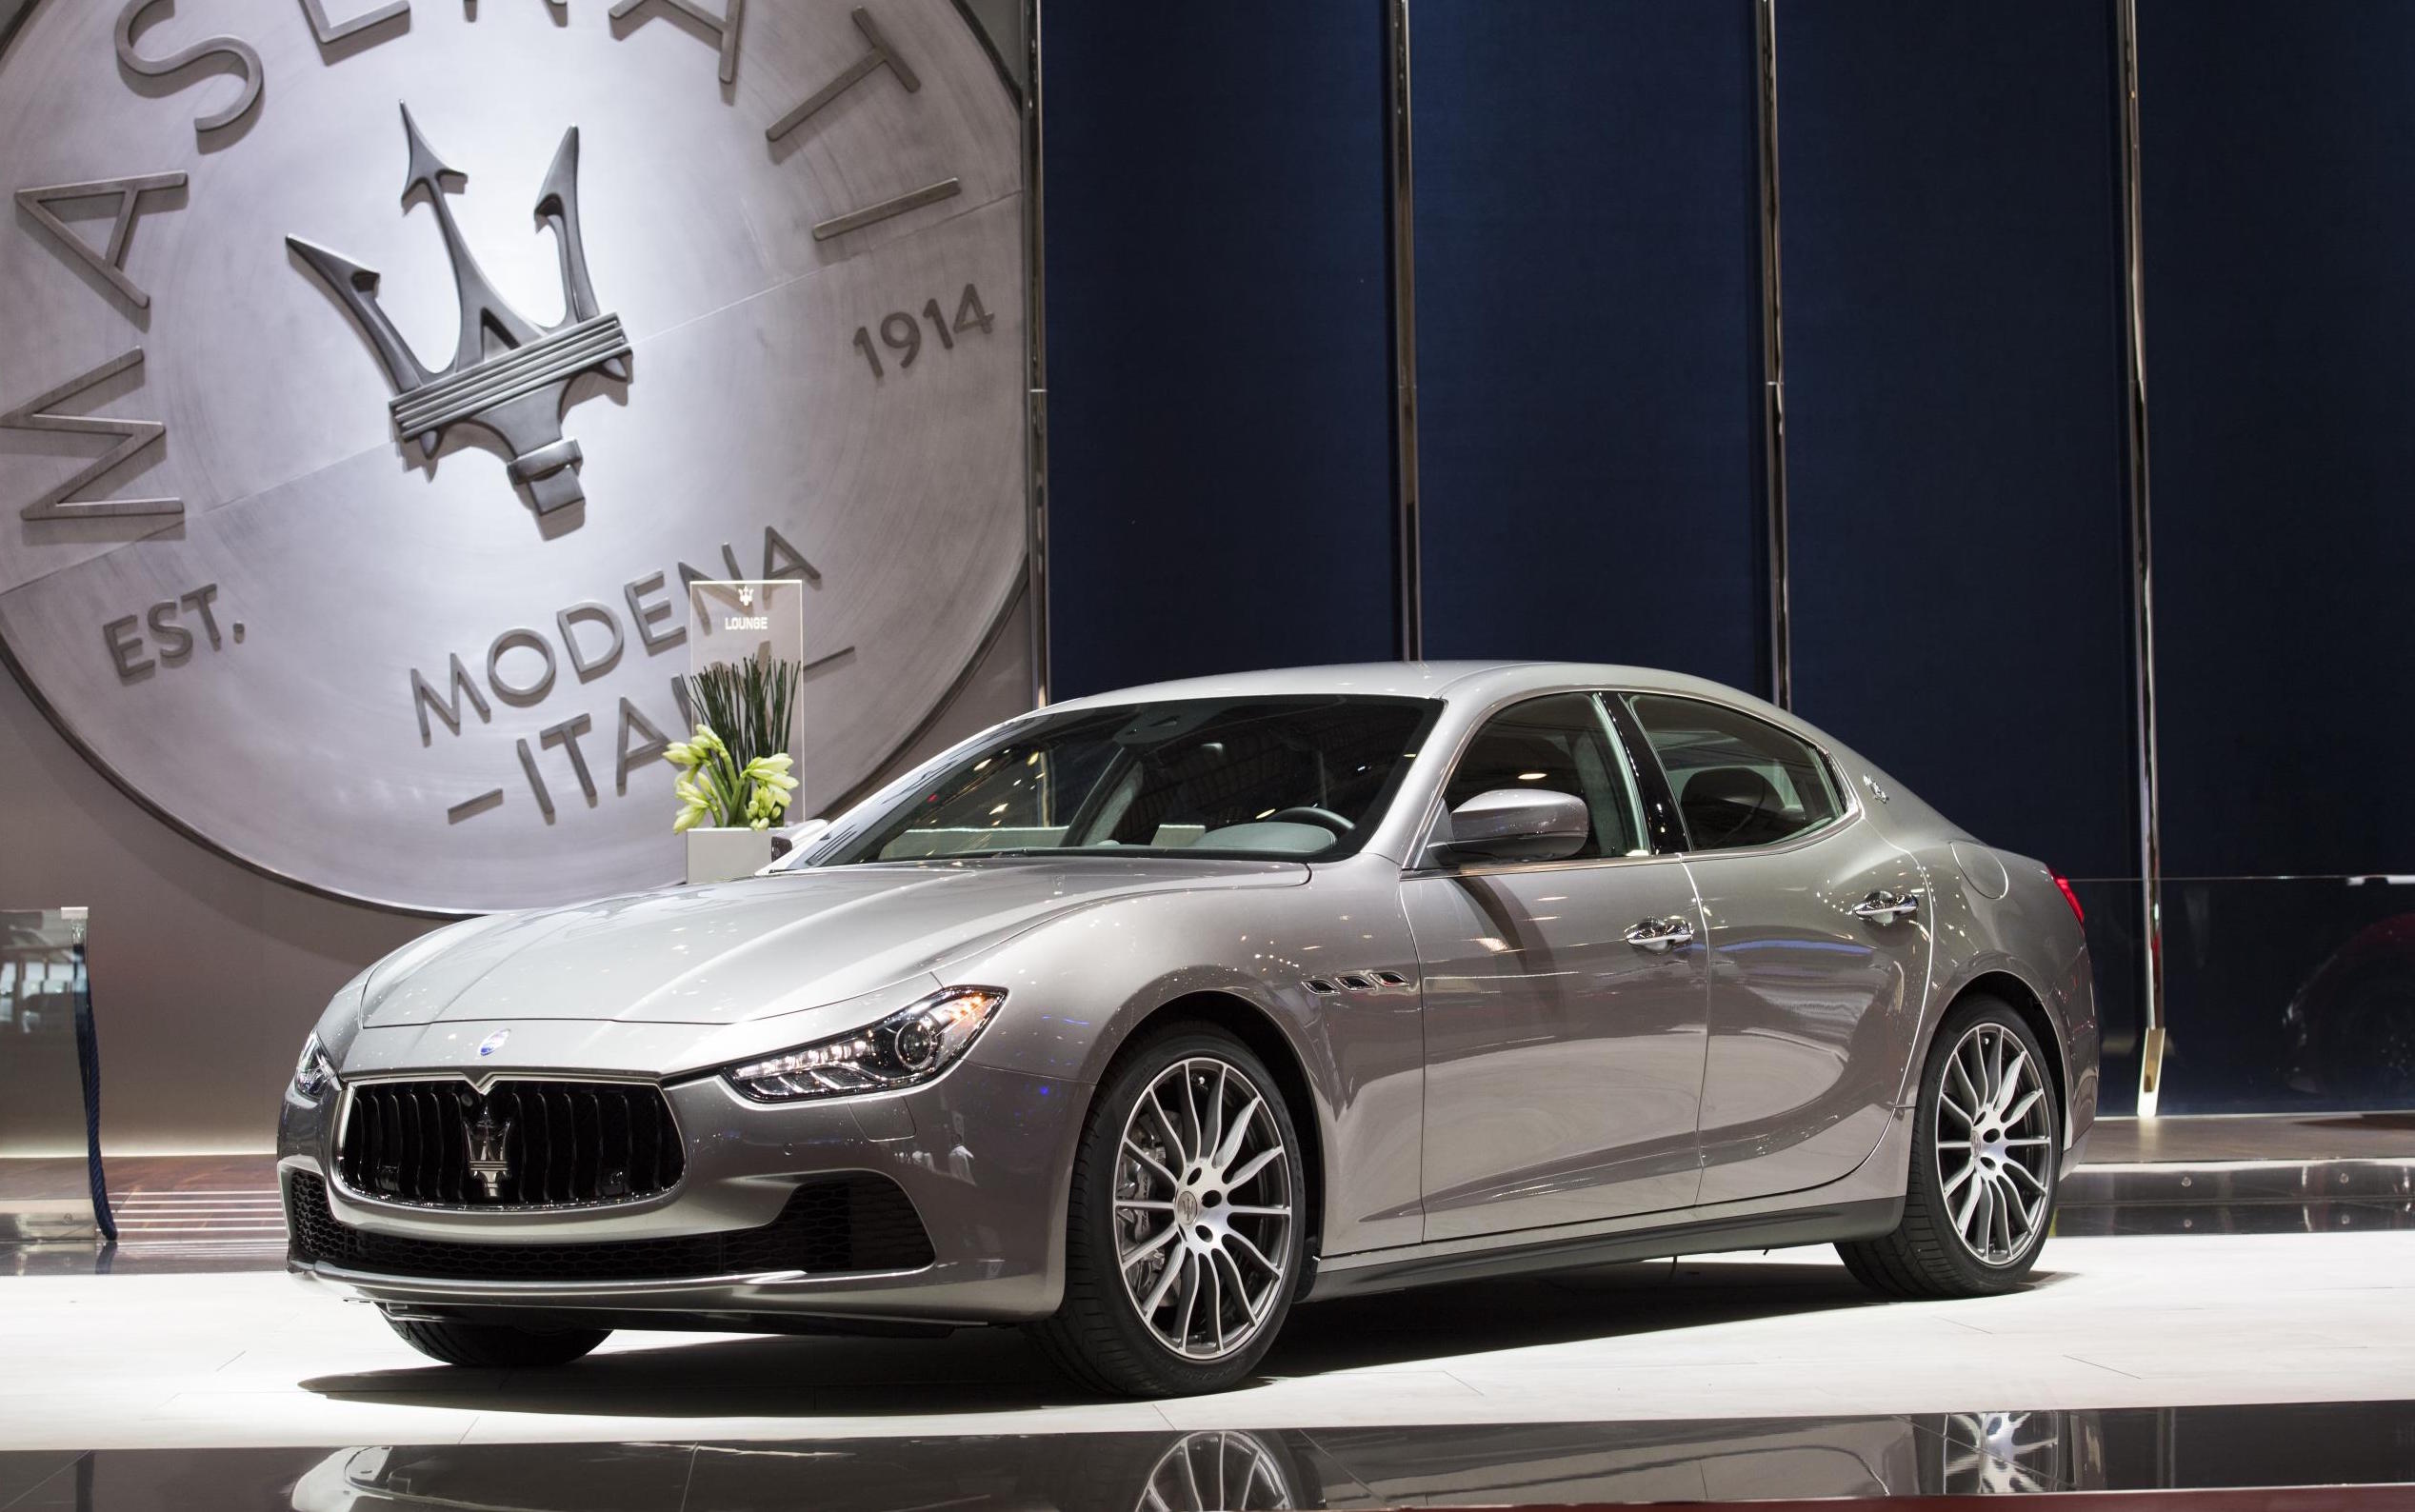 Maserati to debut first hybrid at Beijing motor show with eco Ghibli